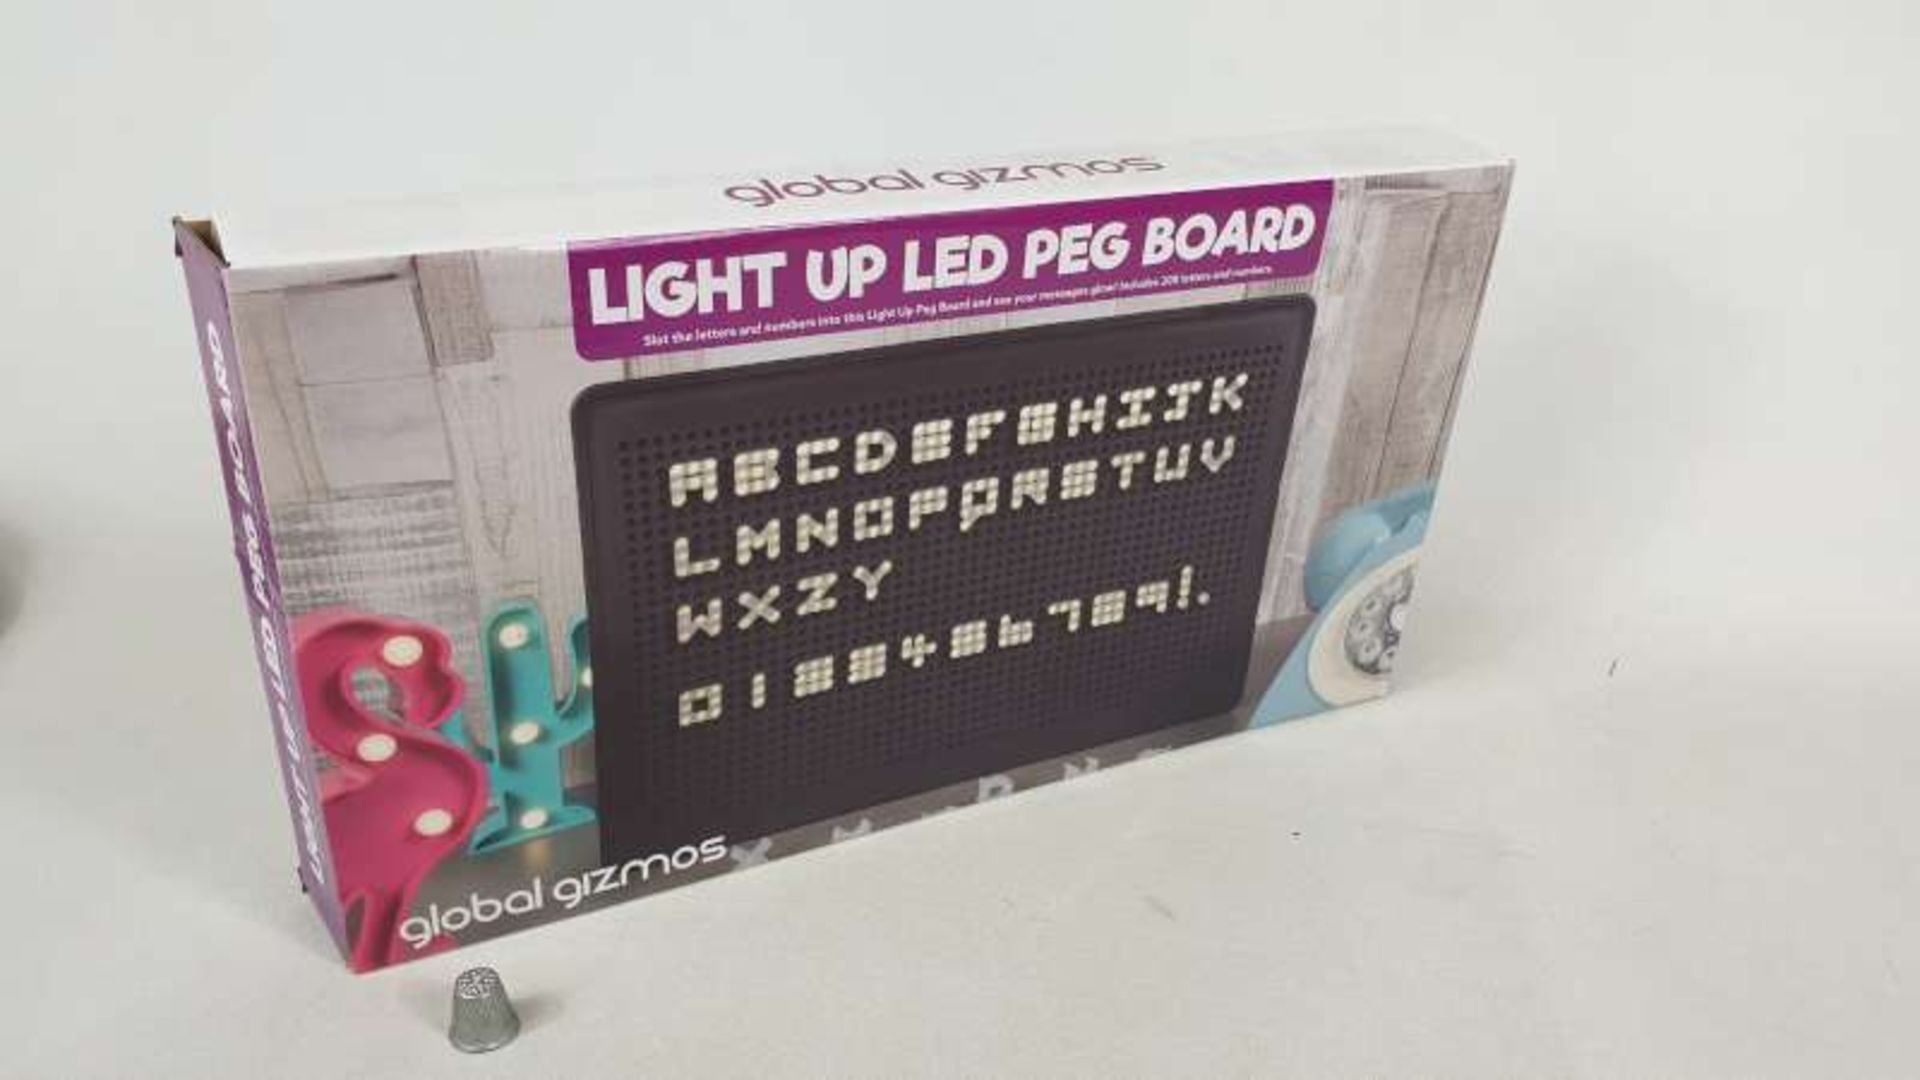 32 X GLOBAL GIZMOS LIGHT UP LED PEG BOARDS IN 4 BOXES